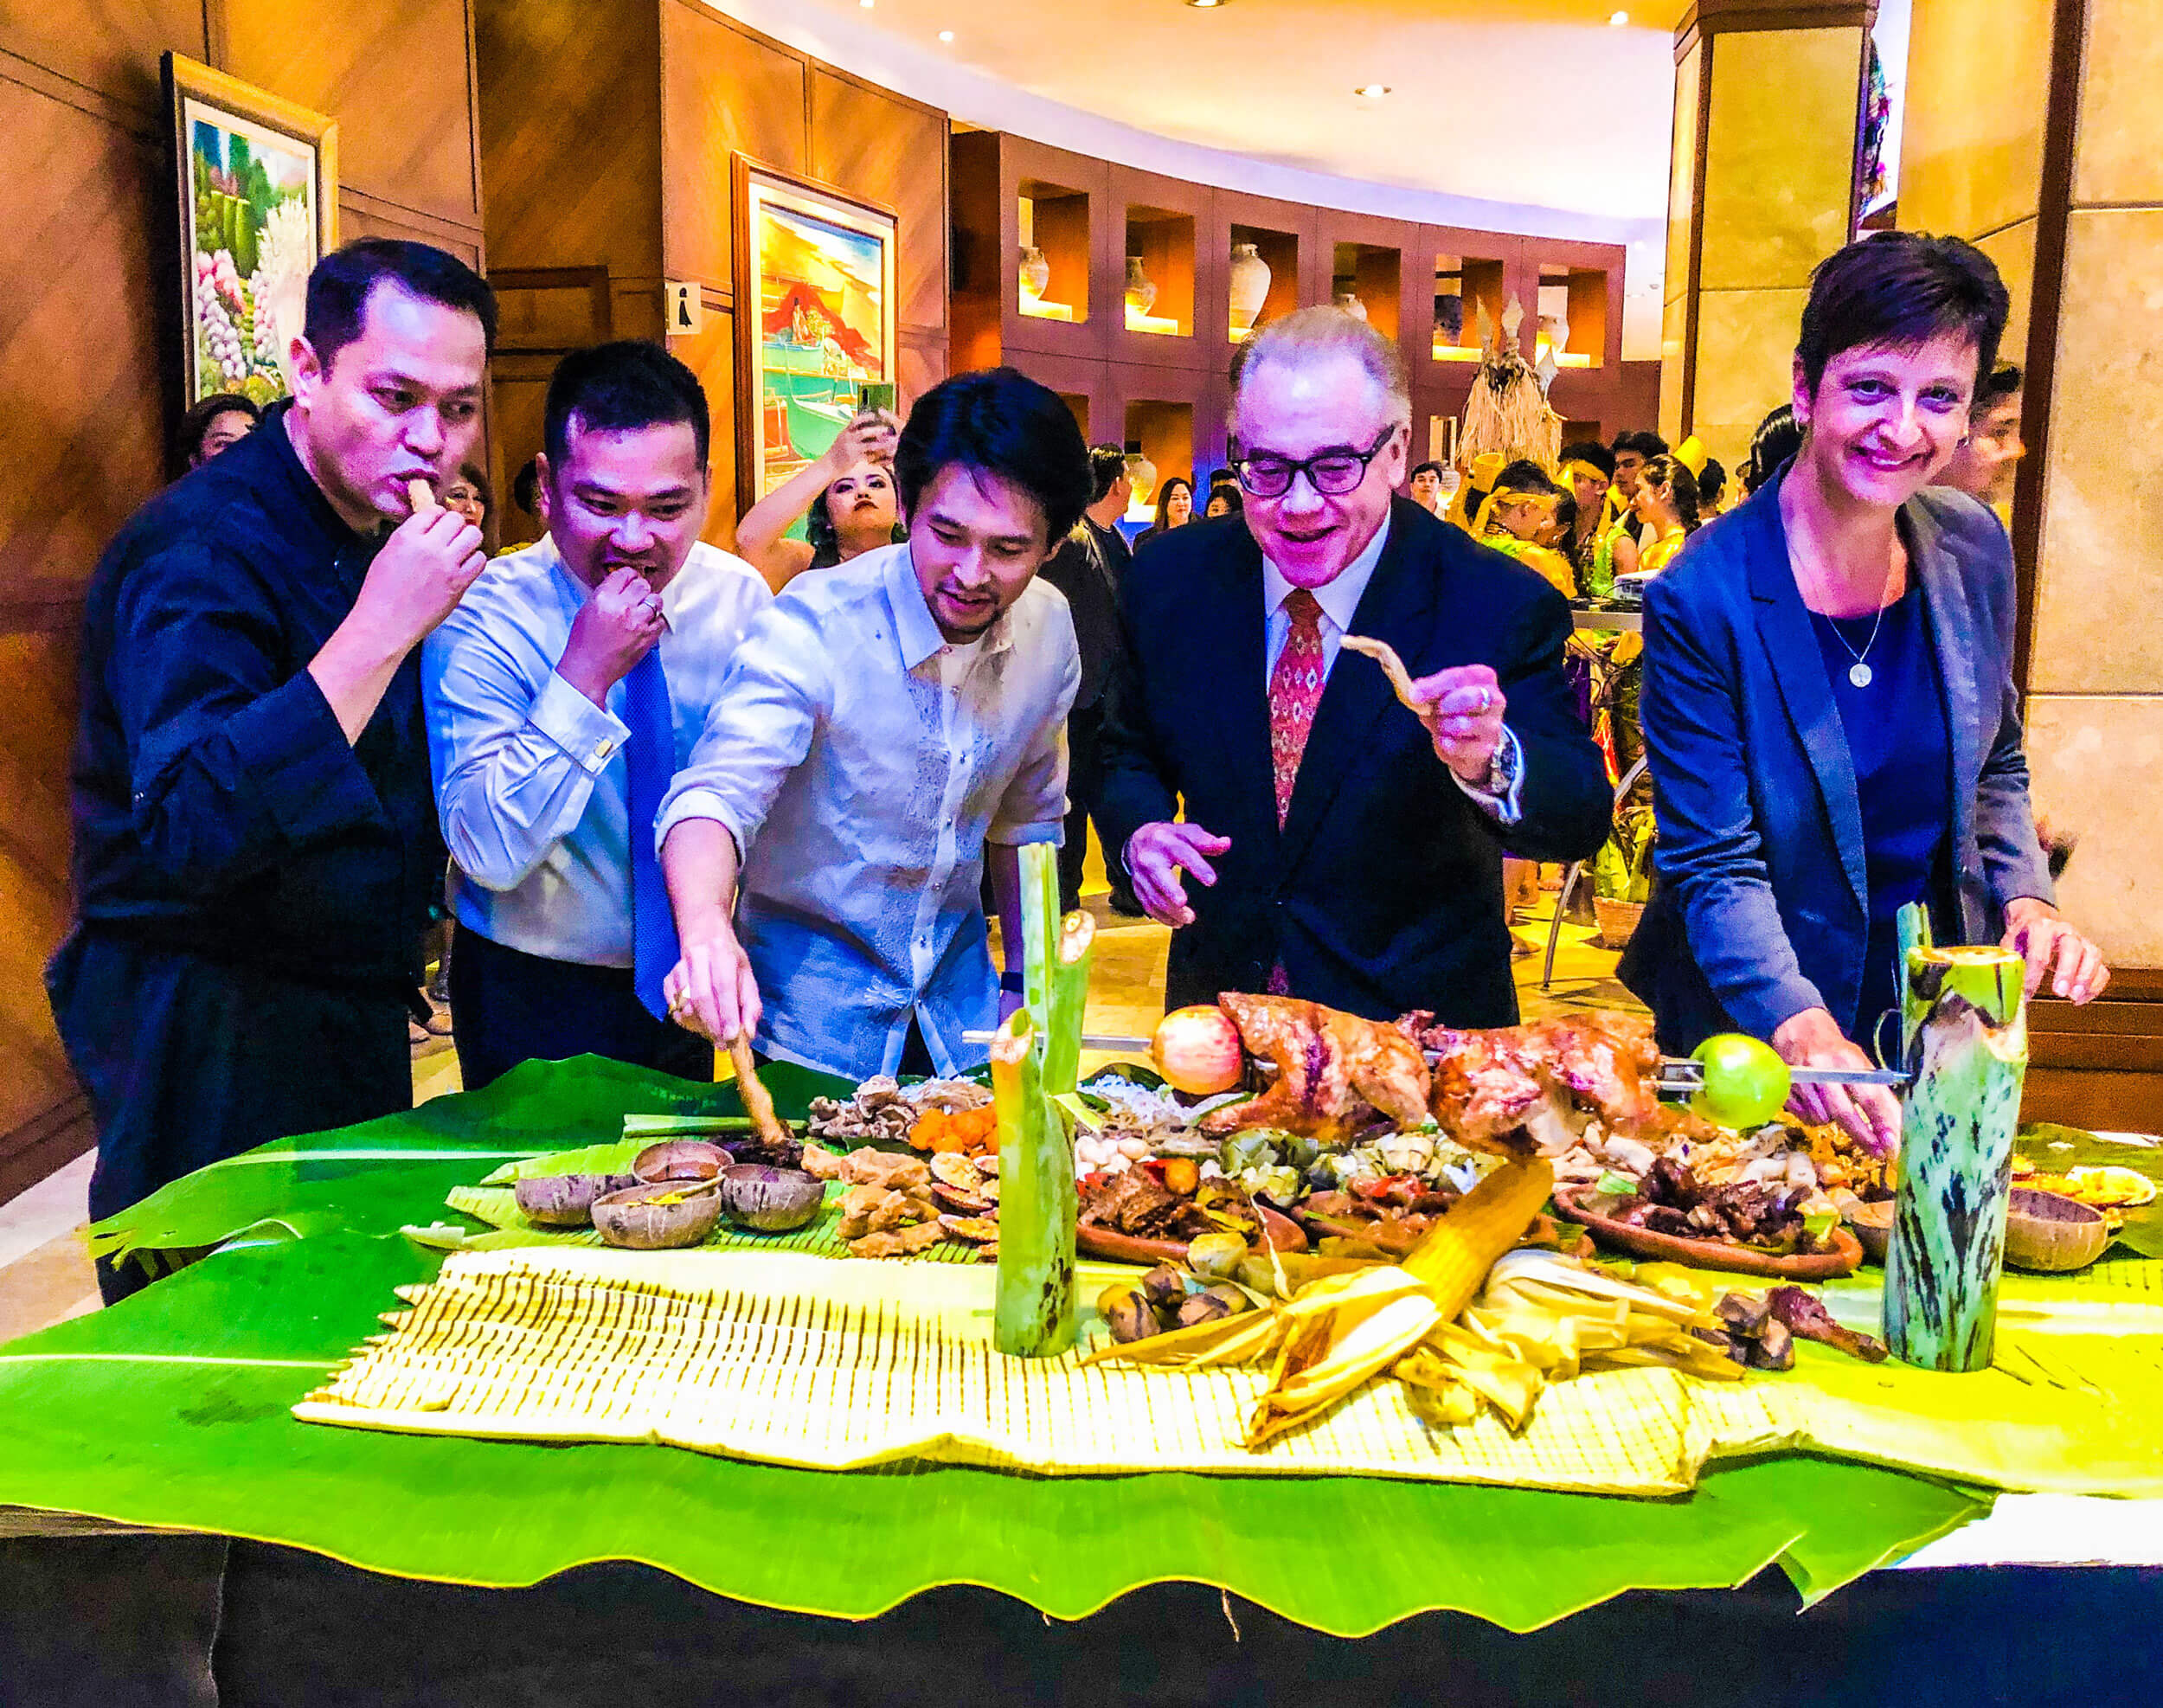 OPENING FEAST. (From left) Marco Polo Plaza Cebu Executive Chef Juanito Abangan; Restaurants, Beverage & Events Director Joward Tongco; Sugbo Mercado Communications Director Michael Karlo Lim; General Manager Brian Connelly; and Resident Manager Michaela Priesner open Sugbusog with a traditional feast of Cebuano dishes.